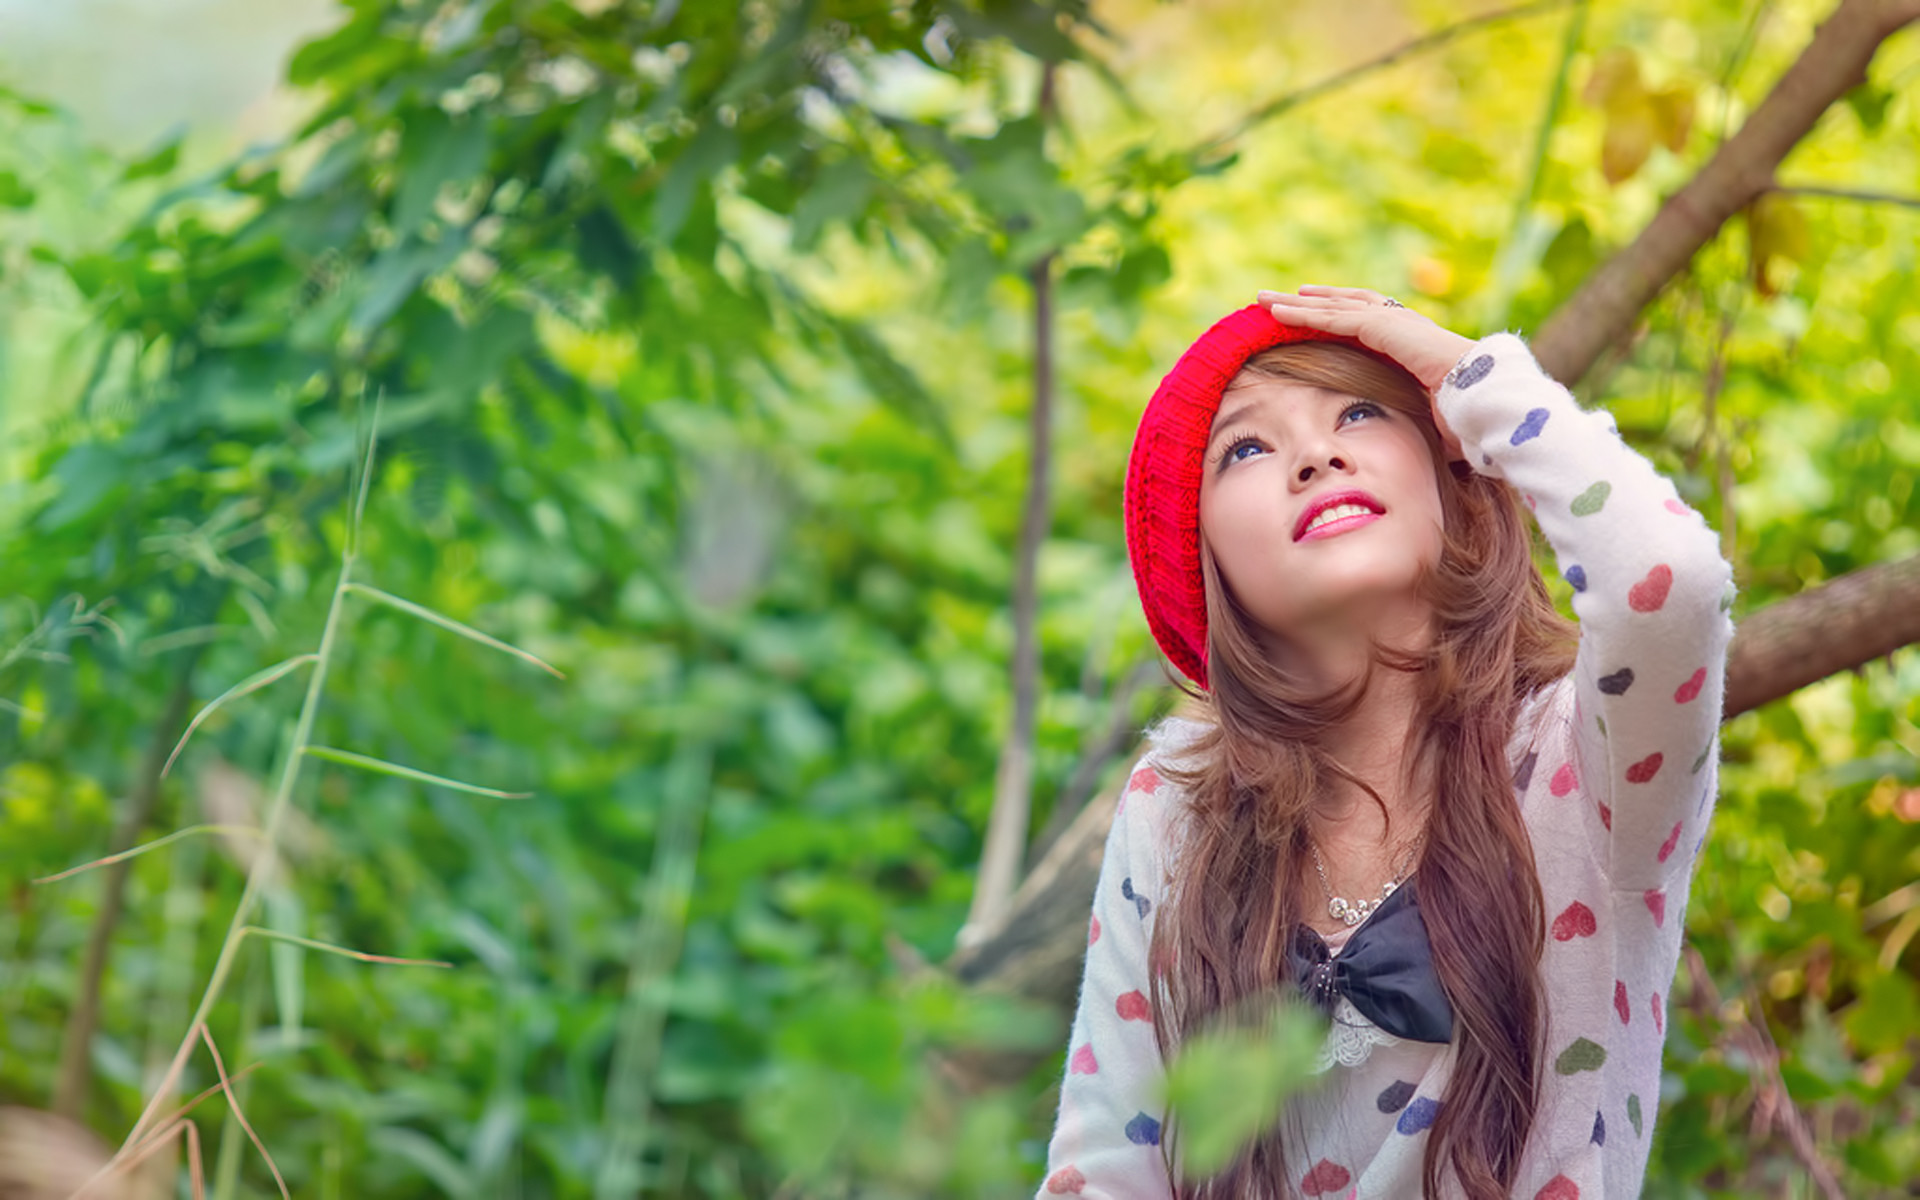 beautiful girl wallpaper hd download,people in nature,hair,green,beauty,red